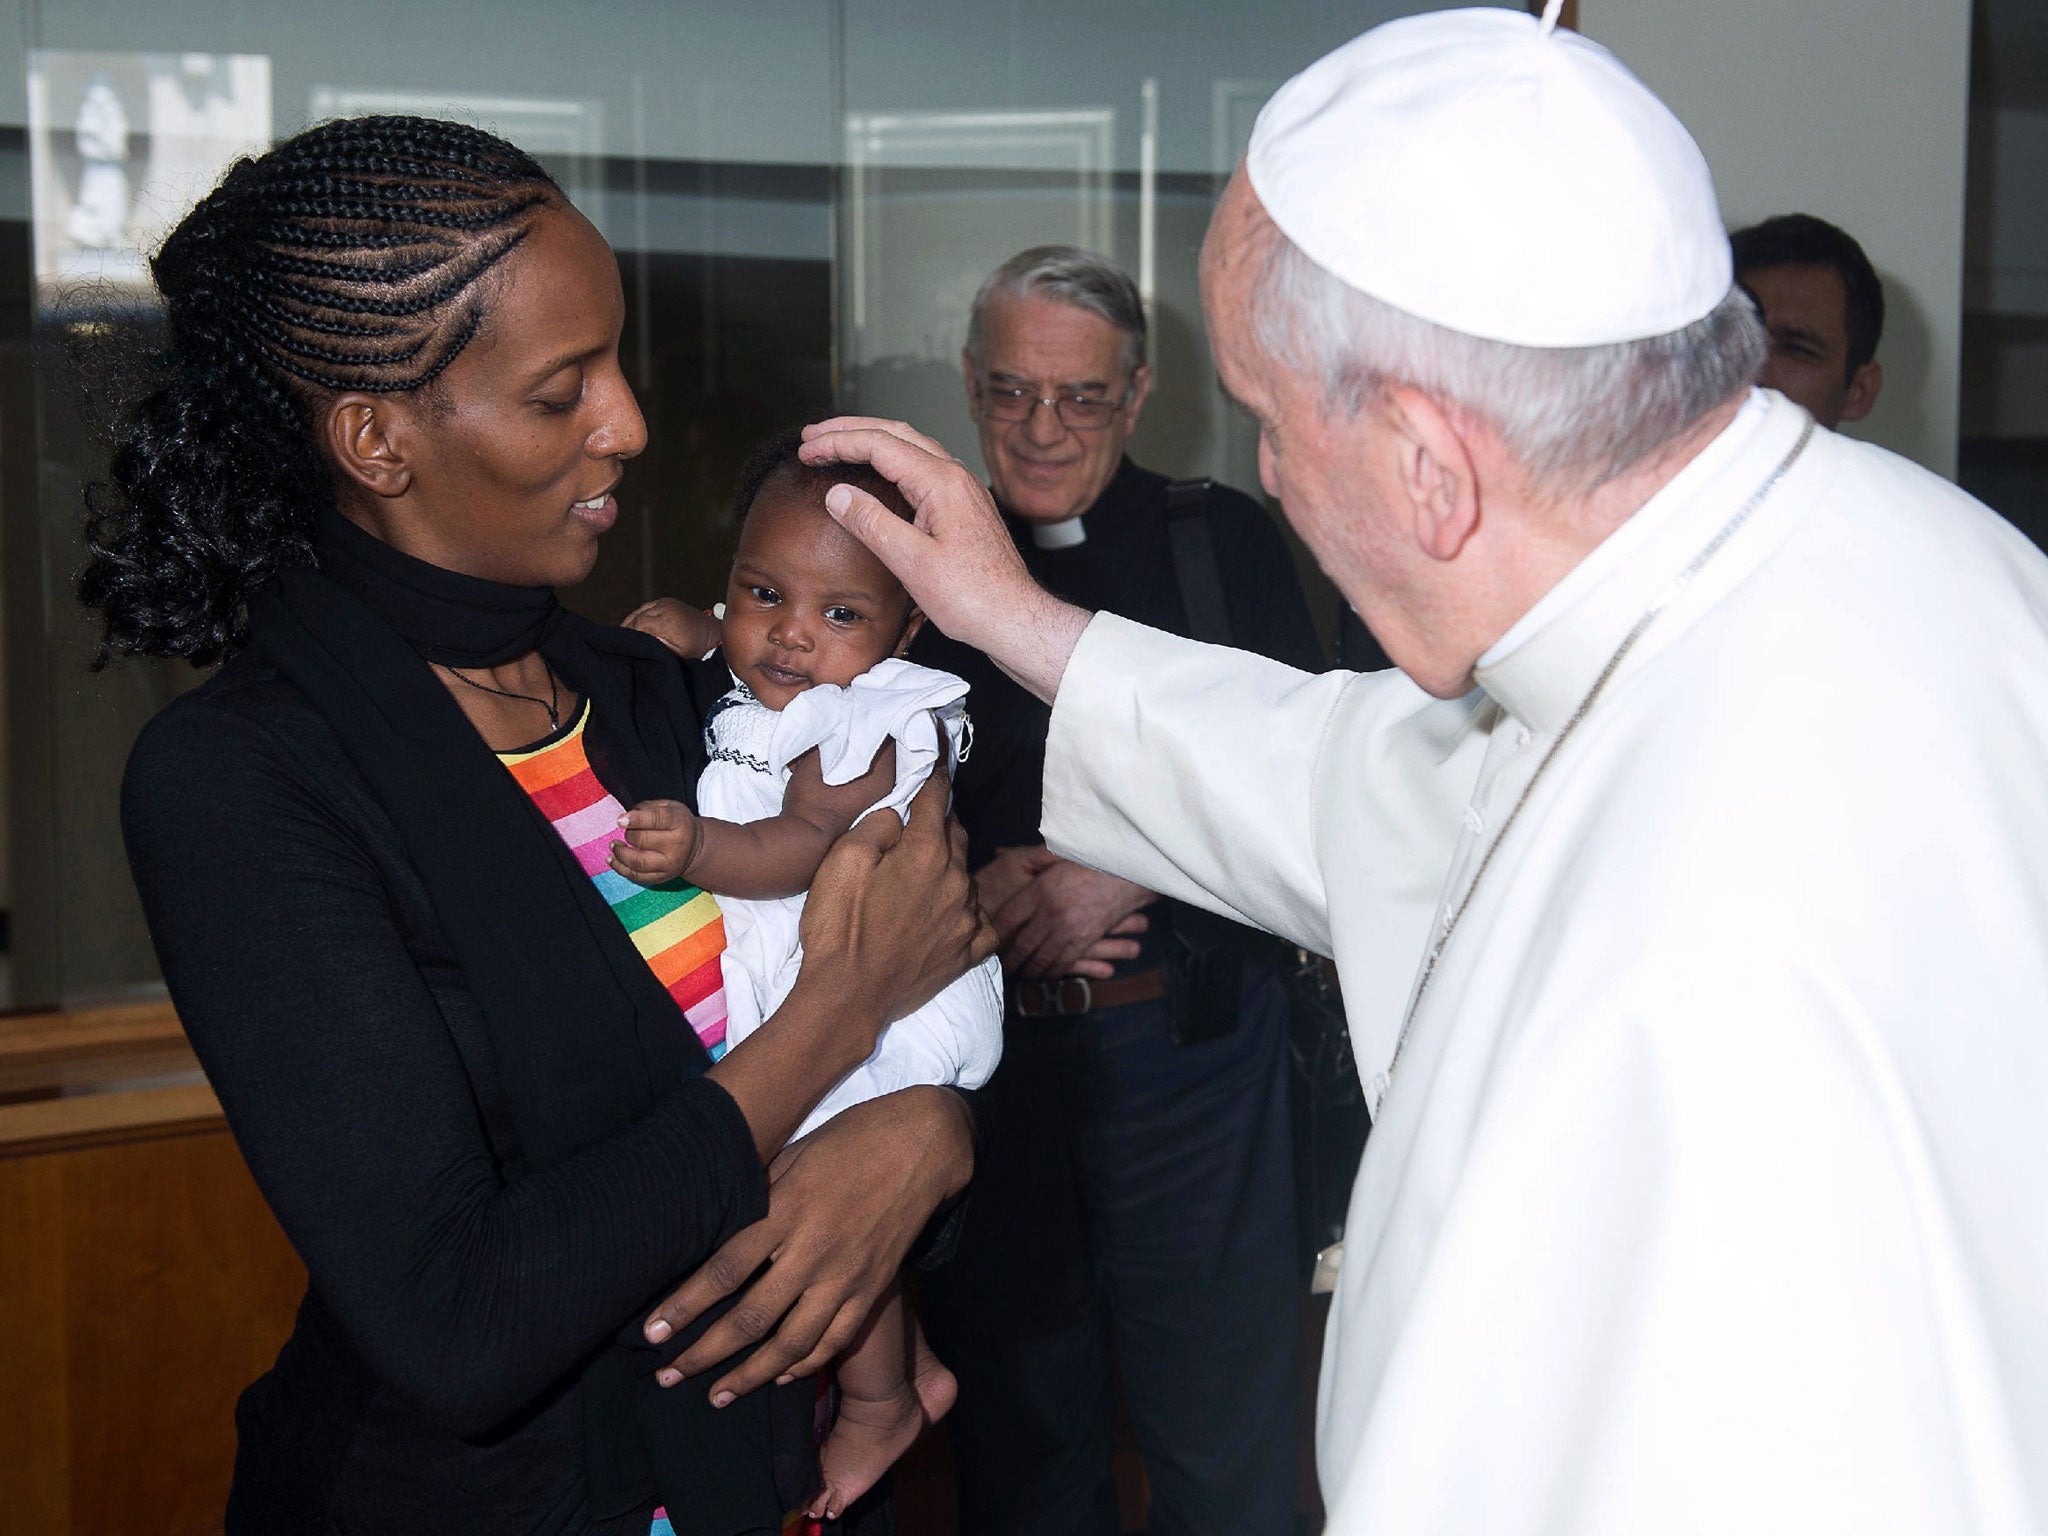 A handout photo released by the Osservatore Romano and taken on July 24, 2014 shows Pope Francis greeting Sudanese Christian Meriam Ibrahim and her daughter Maya during a private audience at the Vatican